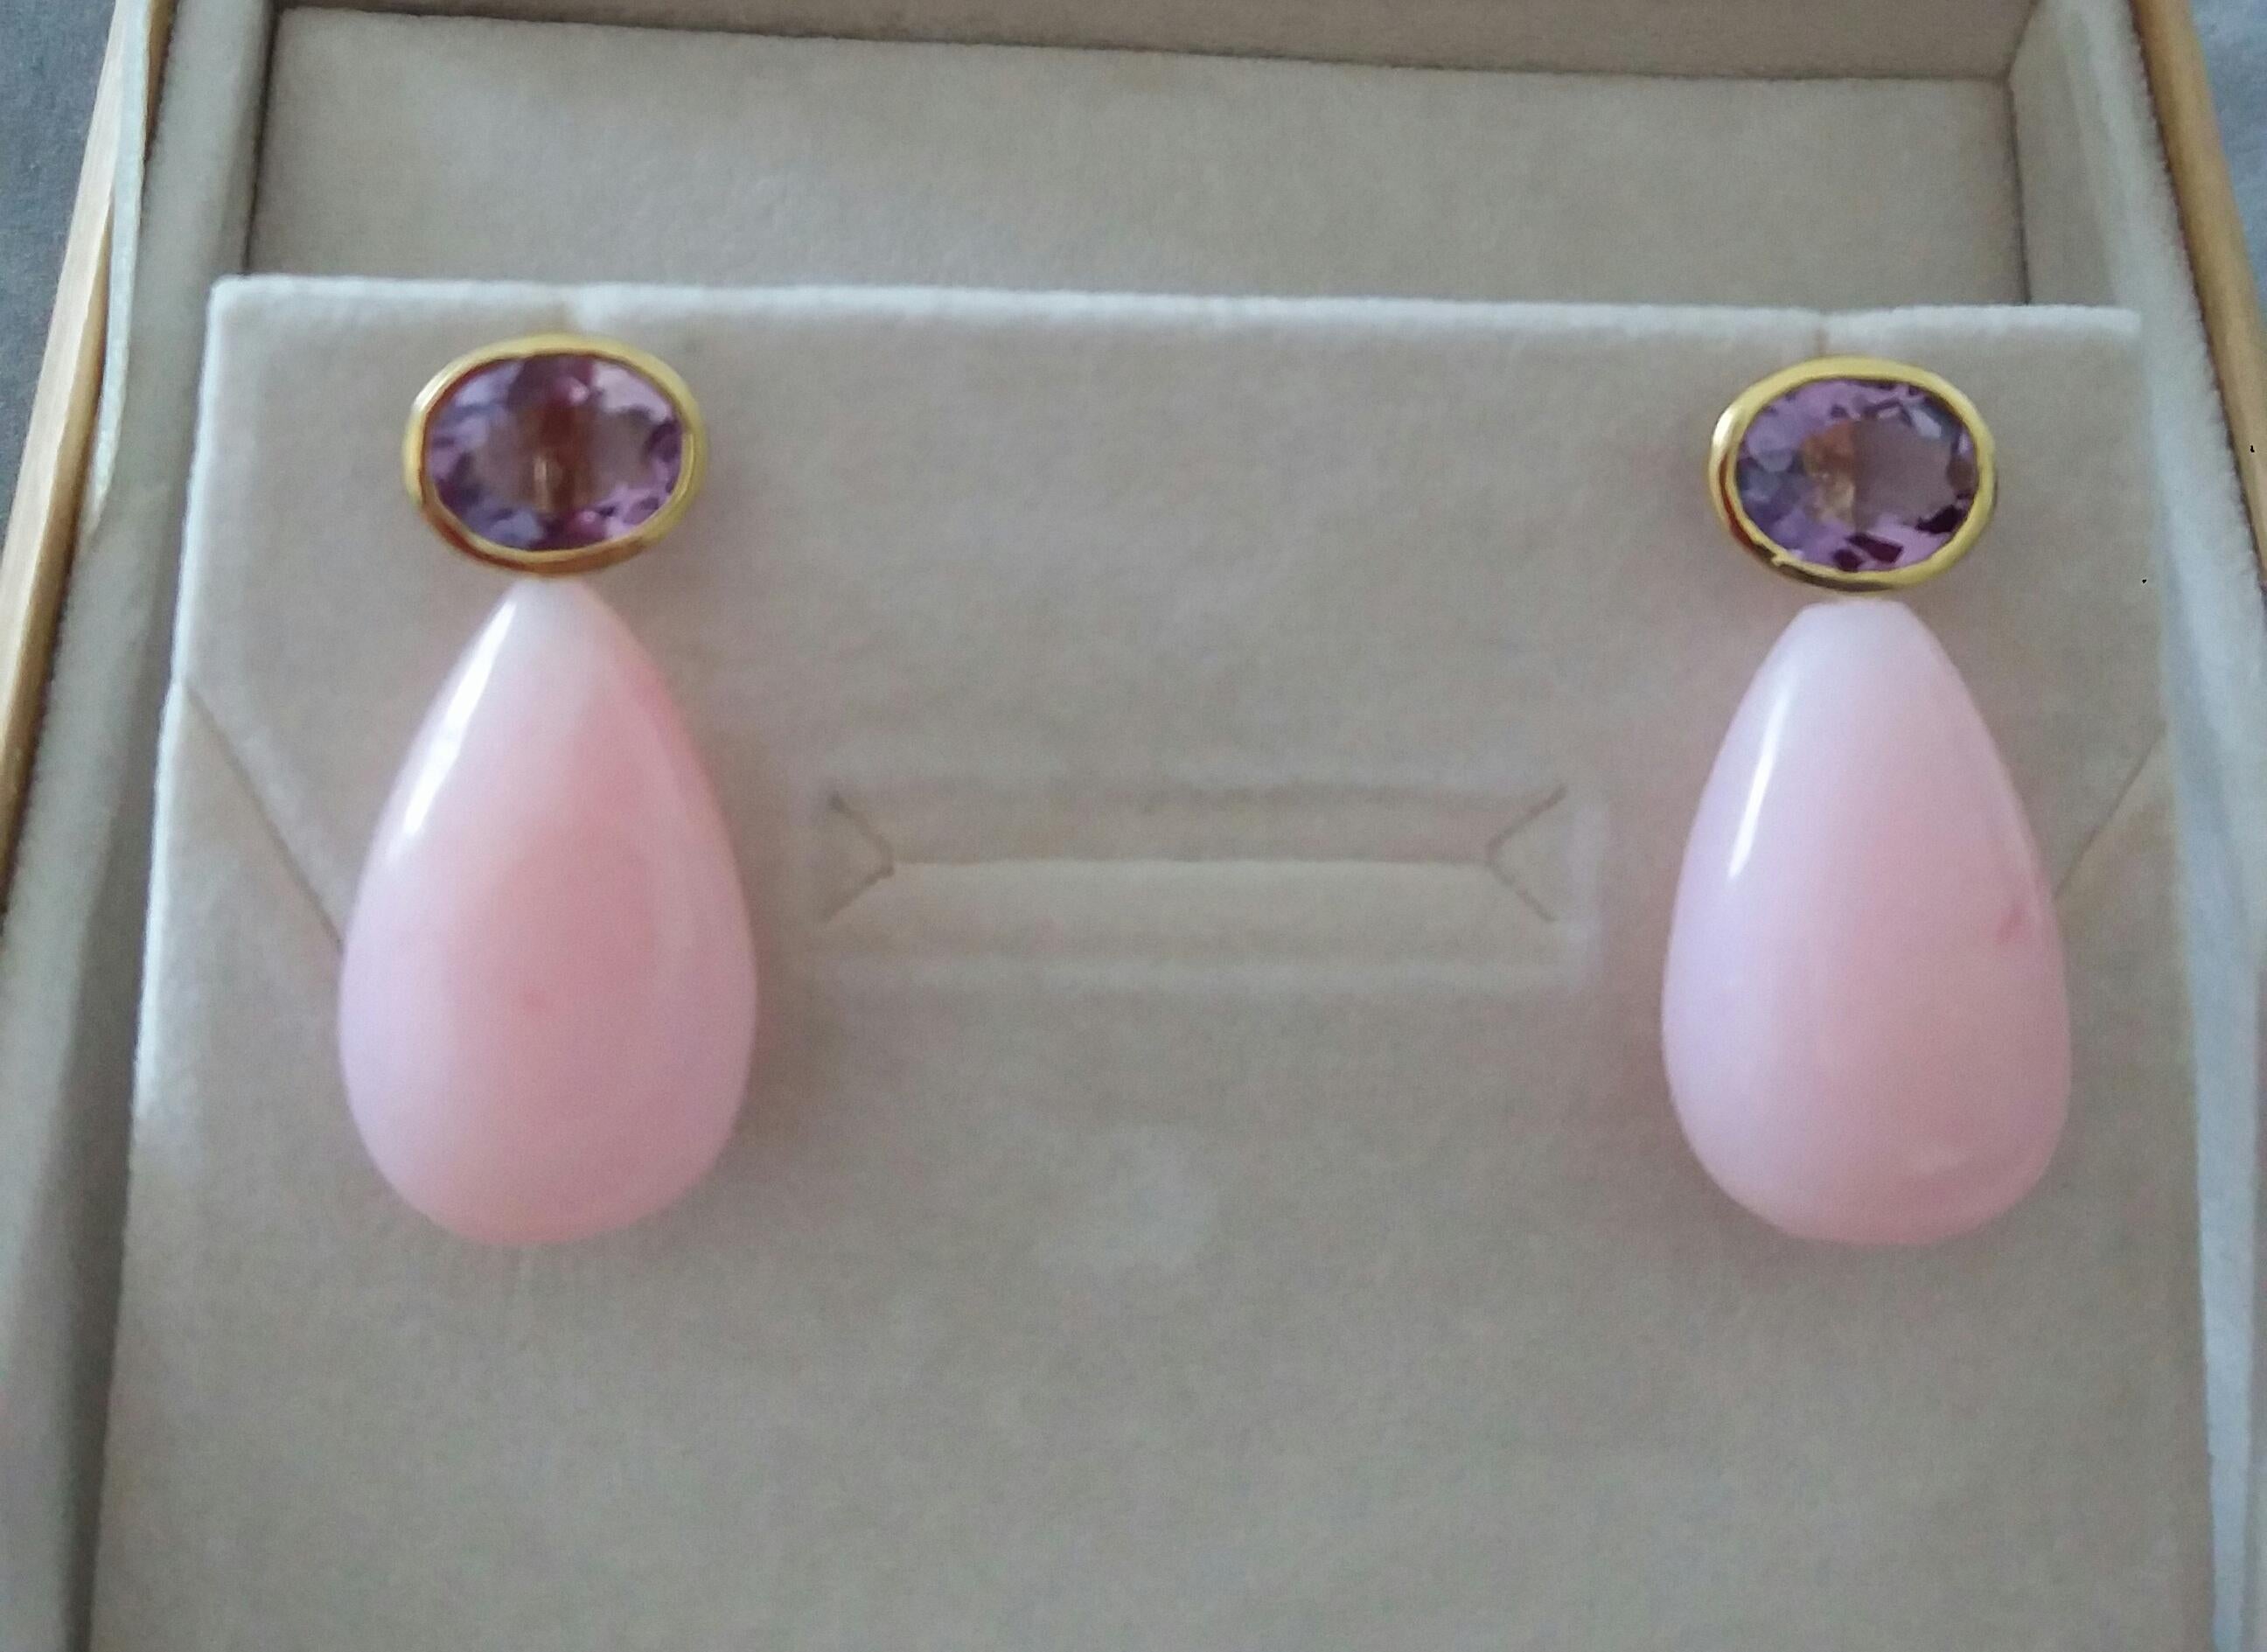 These simple but elegant earrings have 2 faceted Oval Shape Natural Amethysts size 8x10 mm set in yellow gold bezel at the top to which are suspended 2 Pink Opal Plain Round Drops measuring 16 x 25 mm.

In 1978 our workshop started in Italy to make